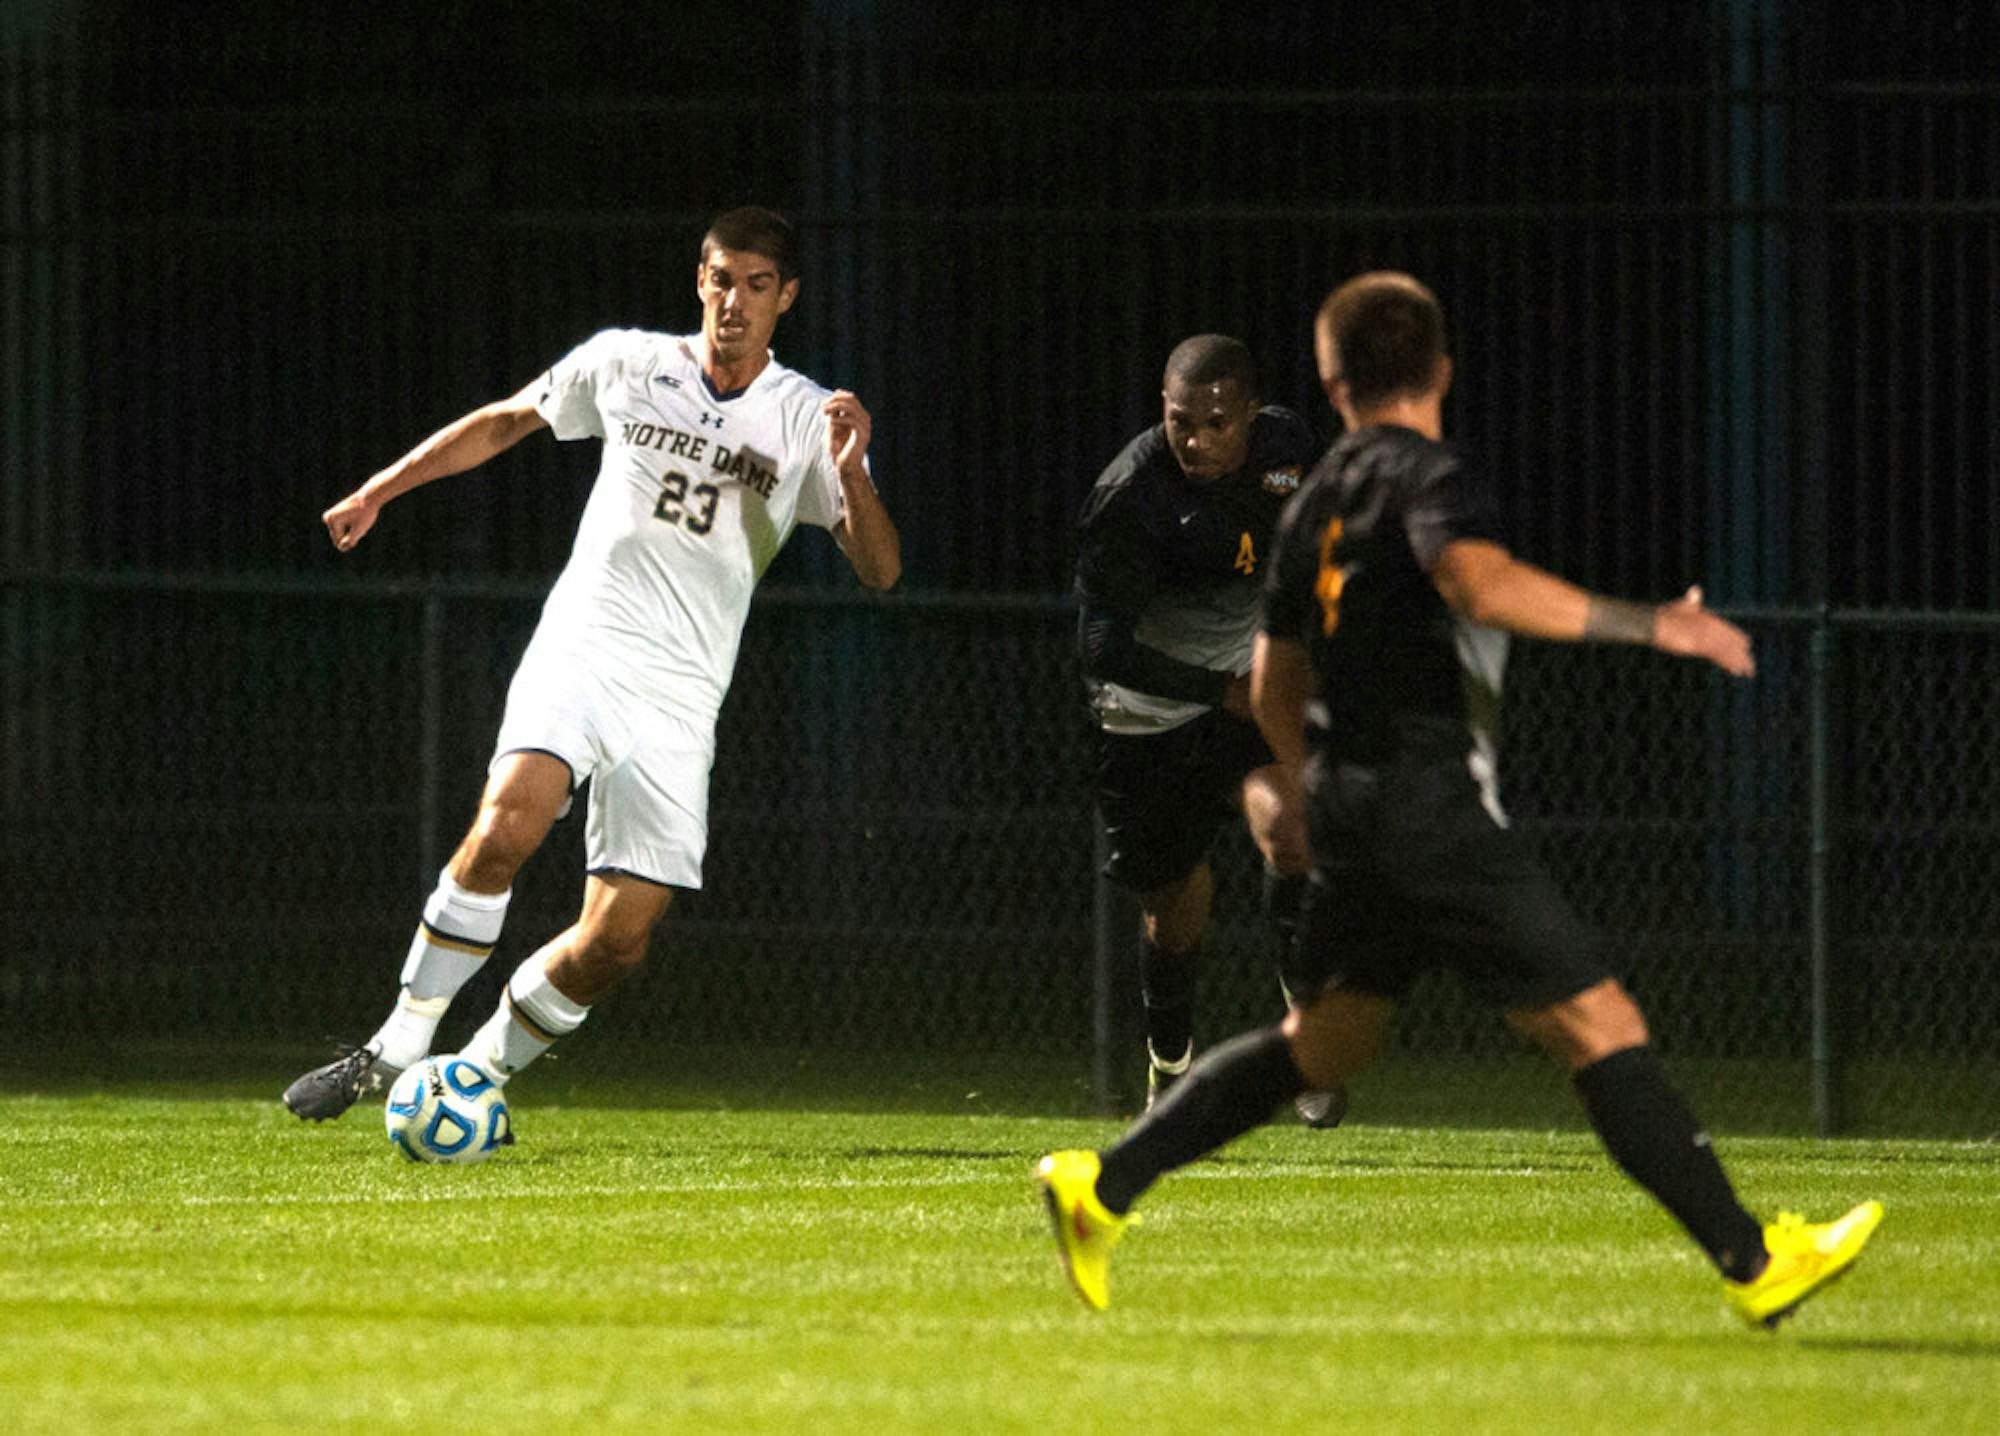 Irish freshman forward Jeffrey Farina protects the ball from a VCU defender Sept. 30 at Alumni Stadium. Notre Dame won the match 1-0 in double overtime. Farina has two goals and six assists this year.